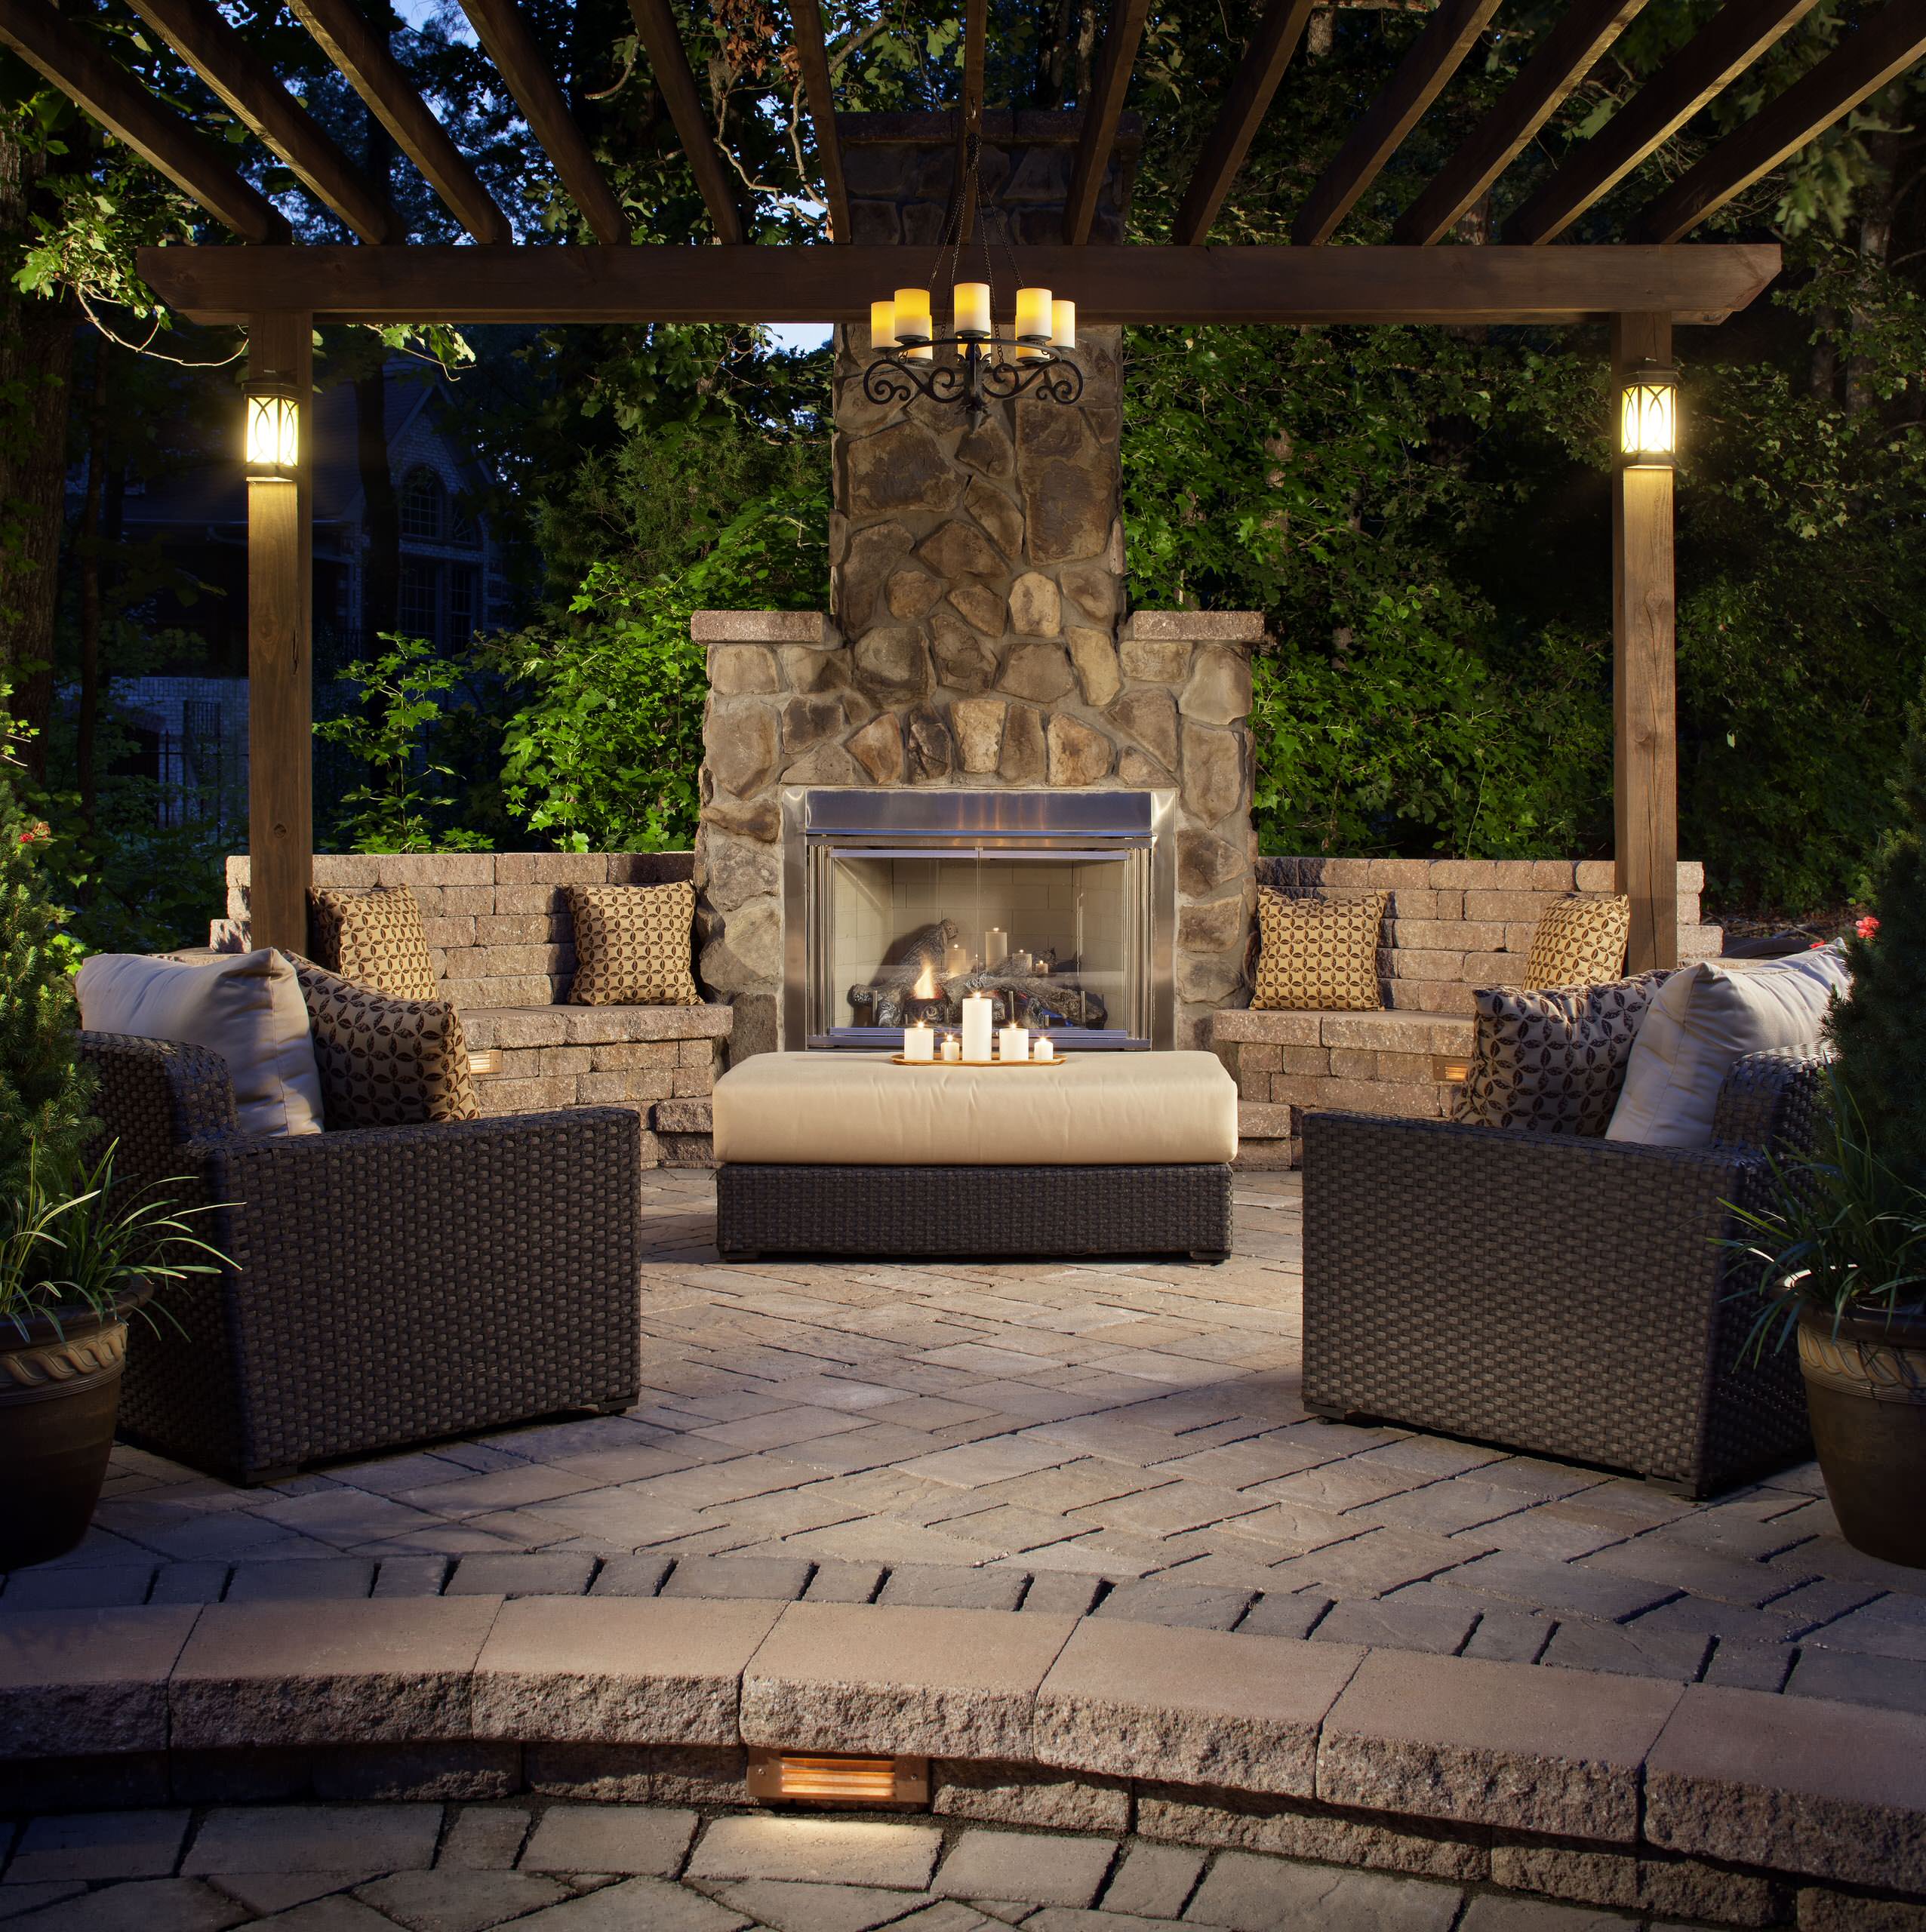 75 Patio With A Fire Pit And A Gazebo Ideas You'Ll Love - August, 2023 |  Houzz